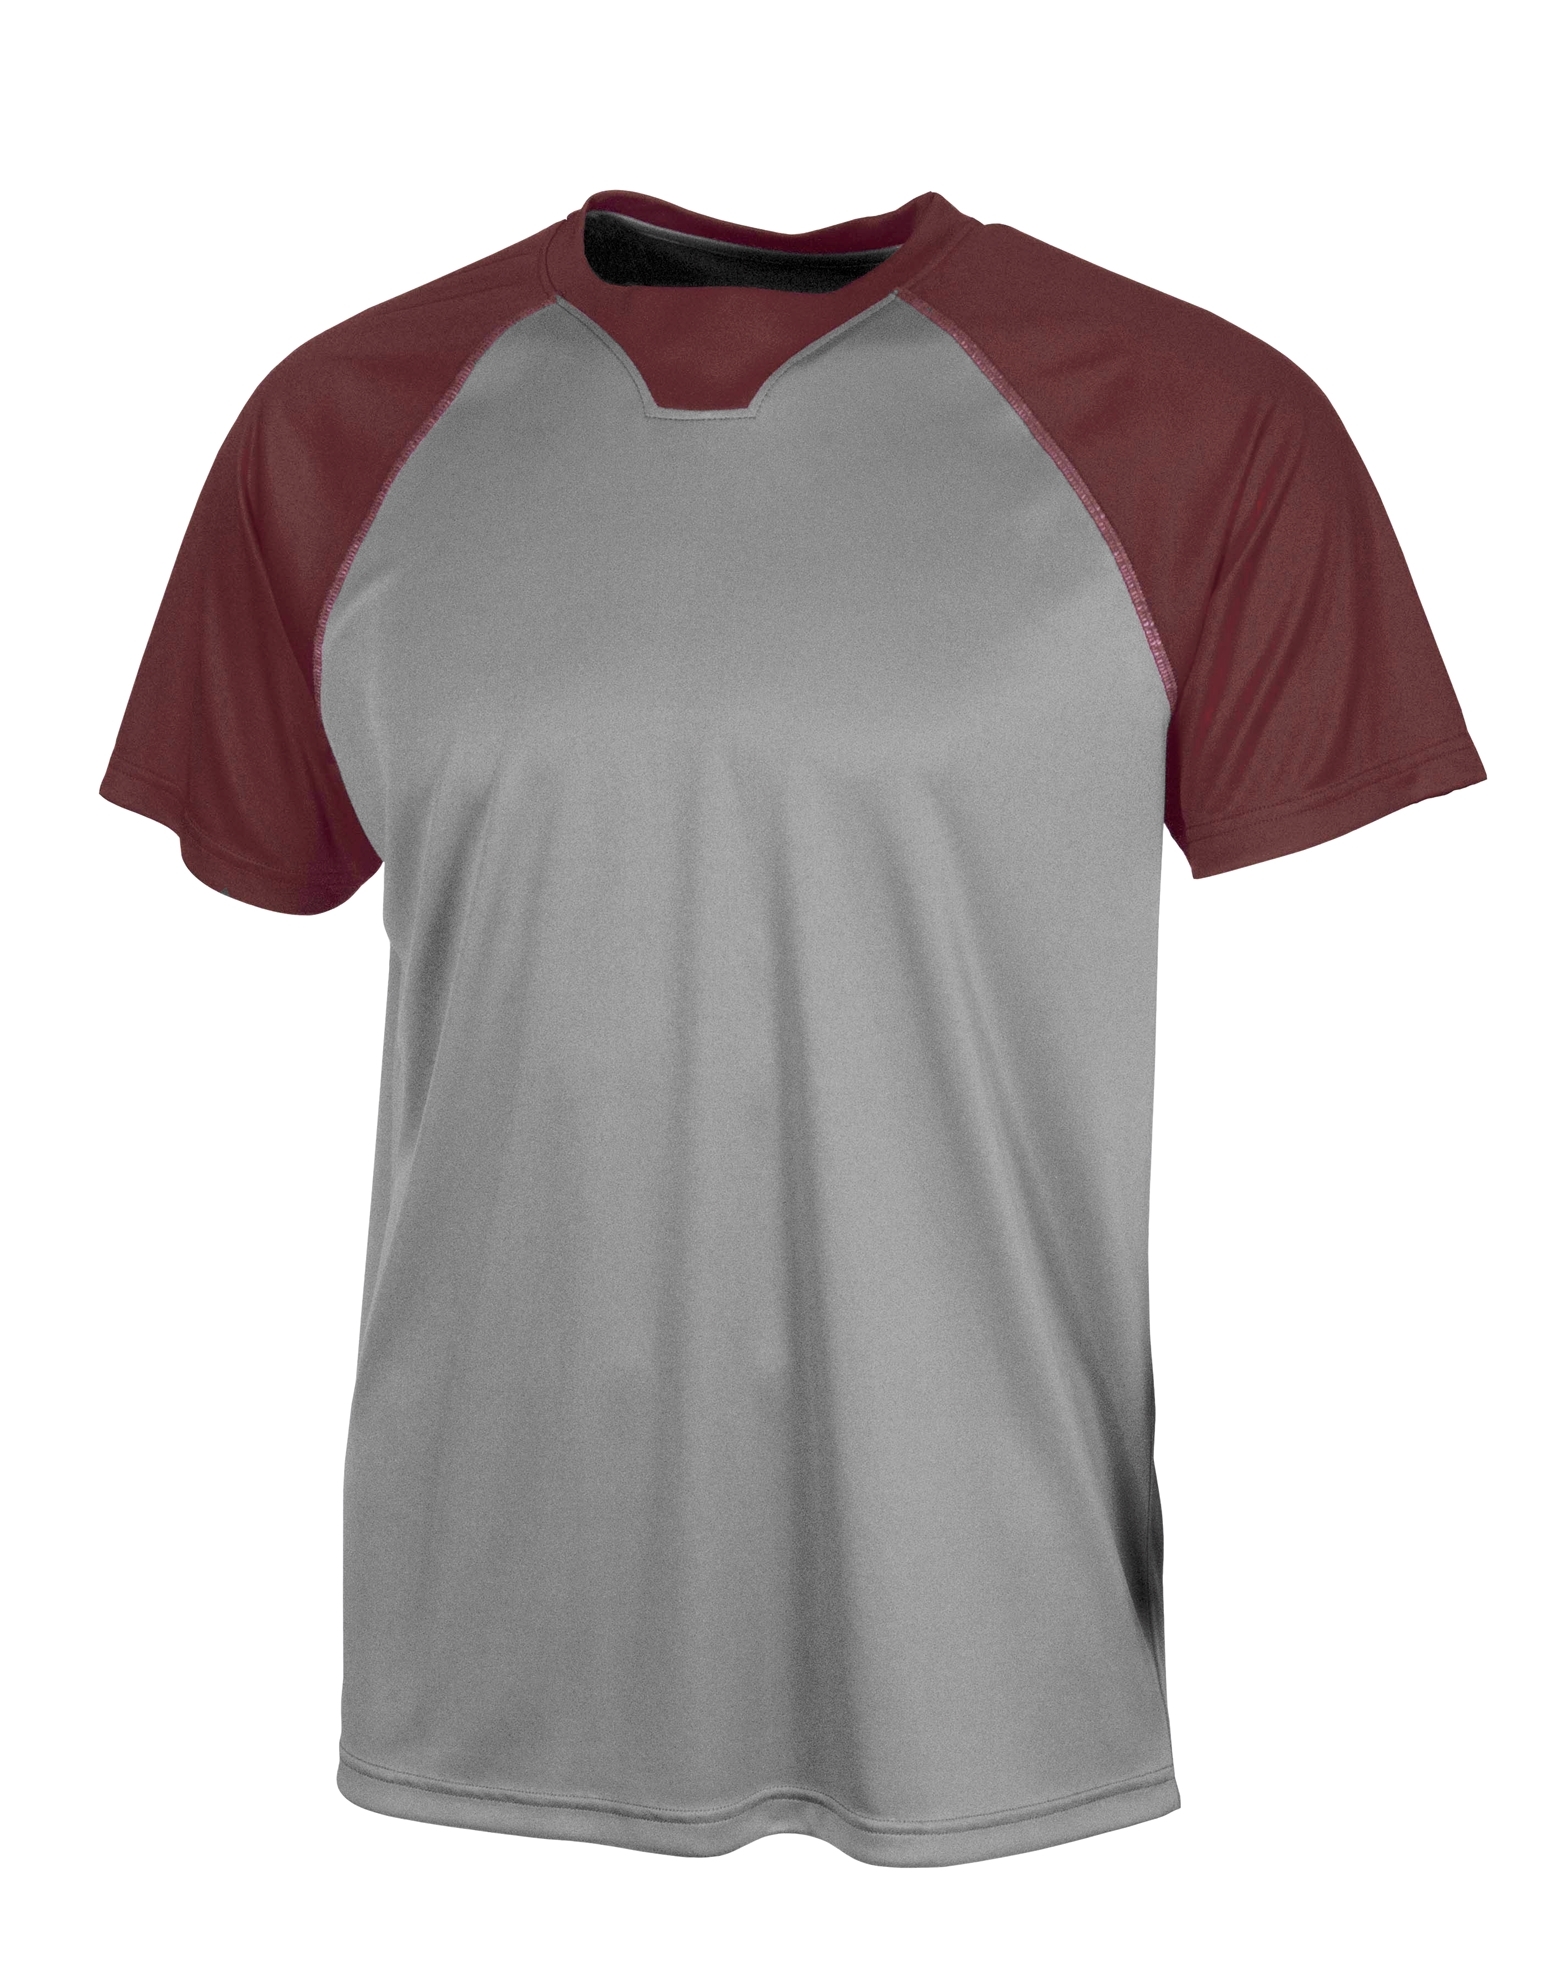 click to view CHARCOAL/MAROON